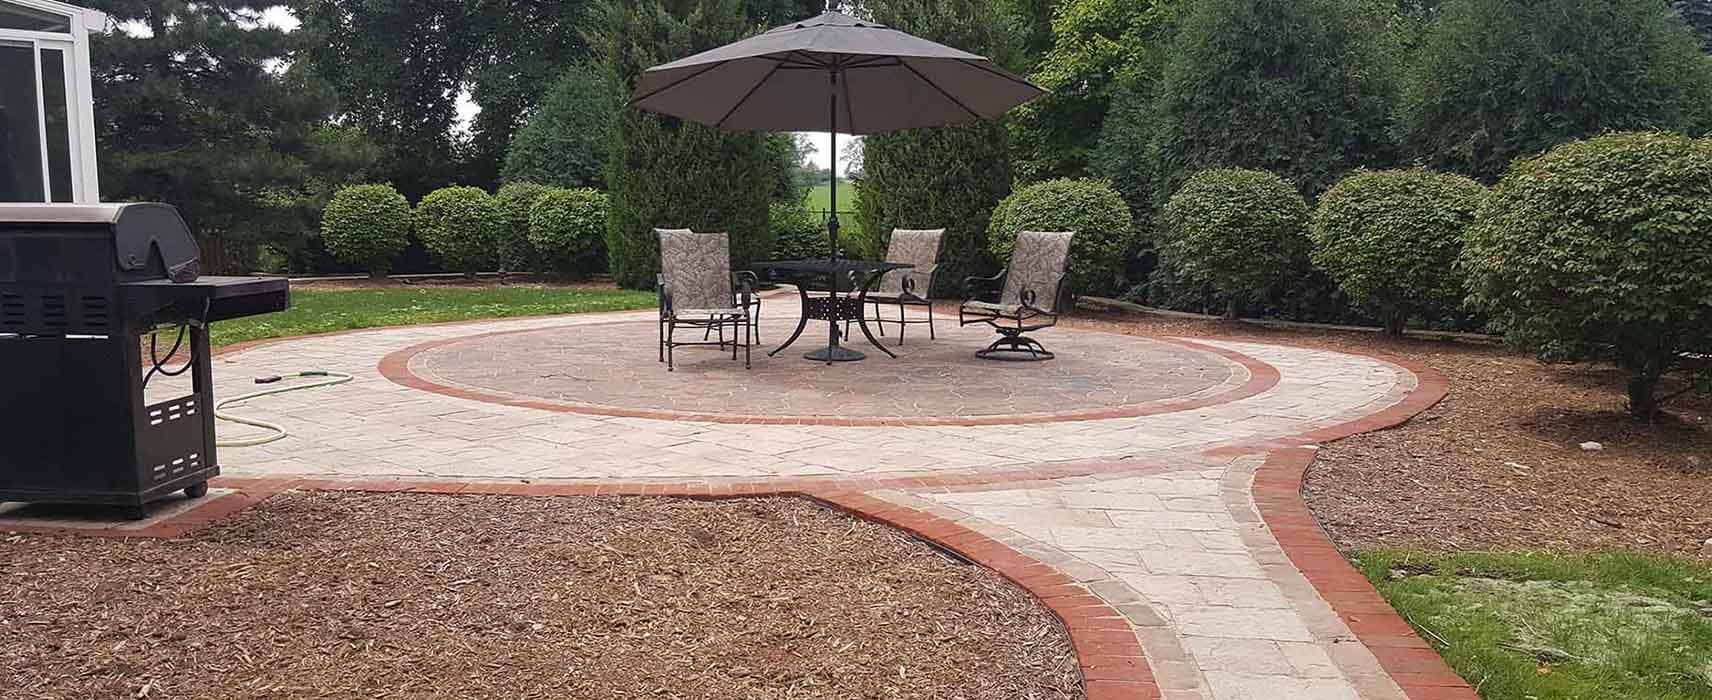 Geneva Landscaping Company, Paving and Patio Builder